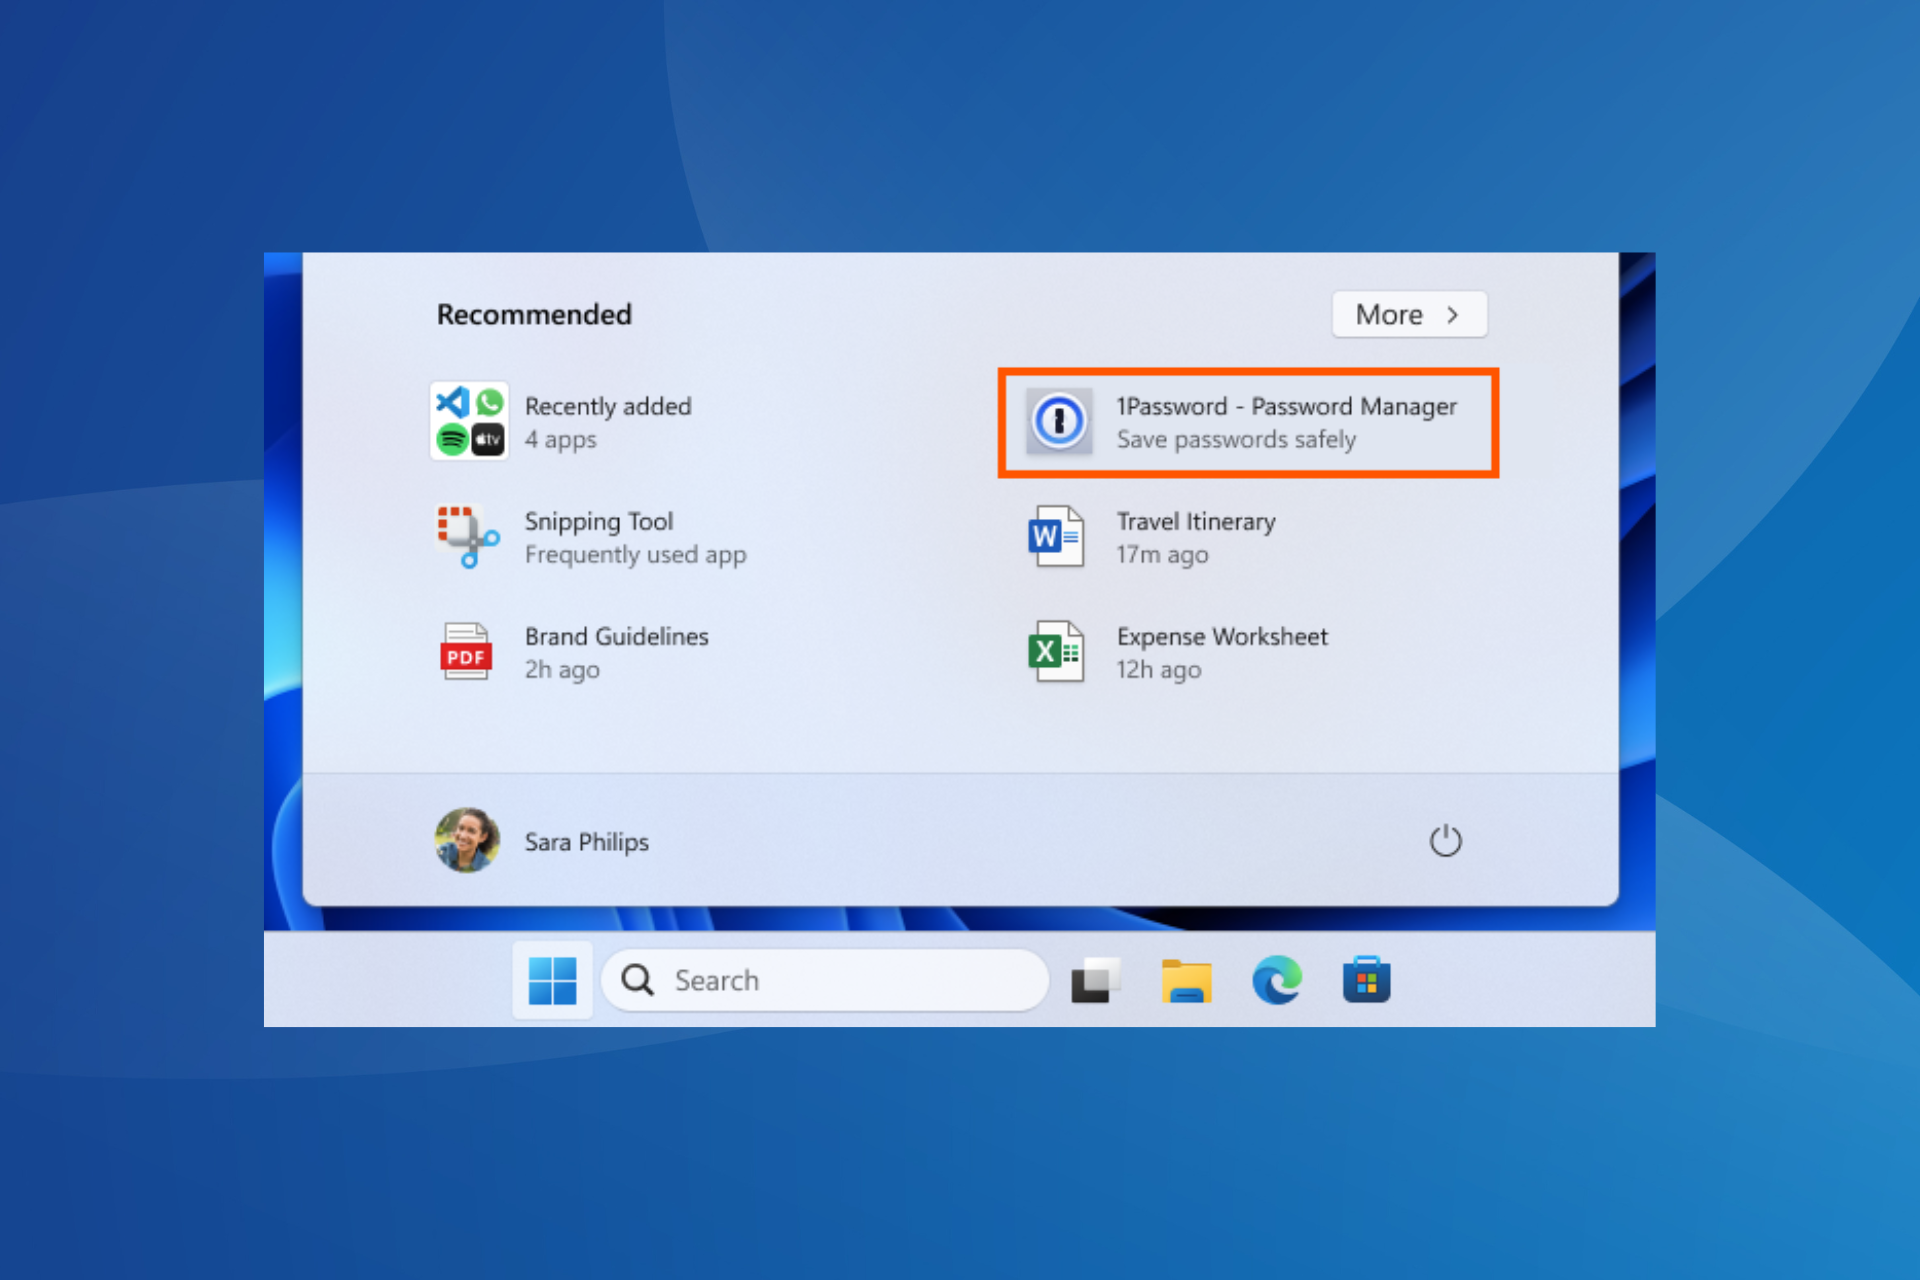 ads and app recommendations in Windows 11 Start Menu